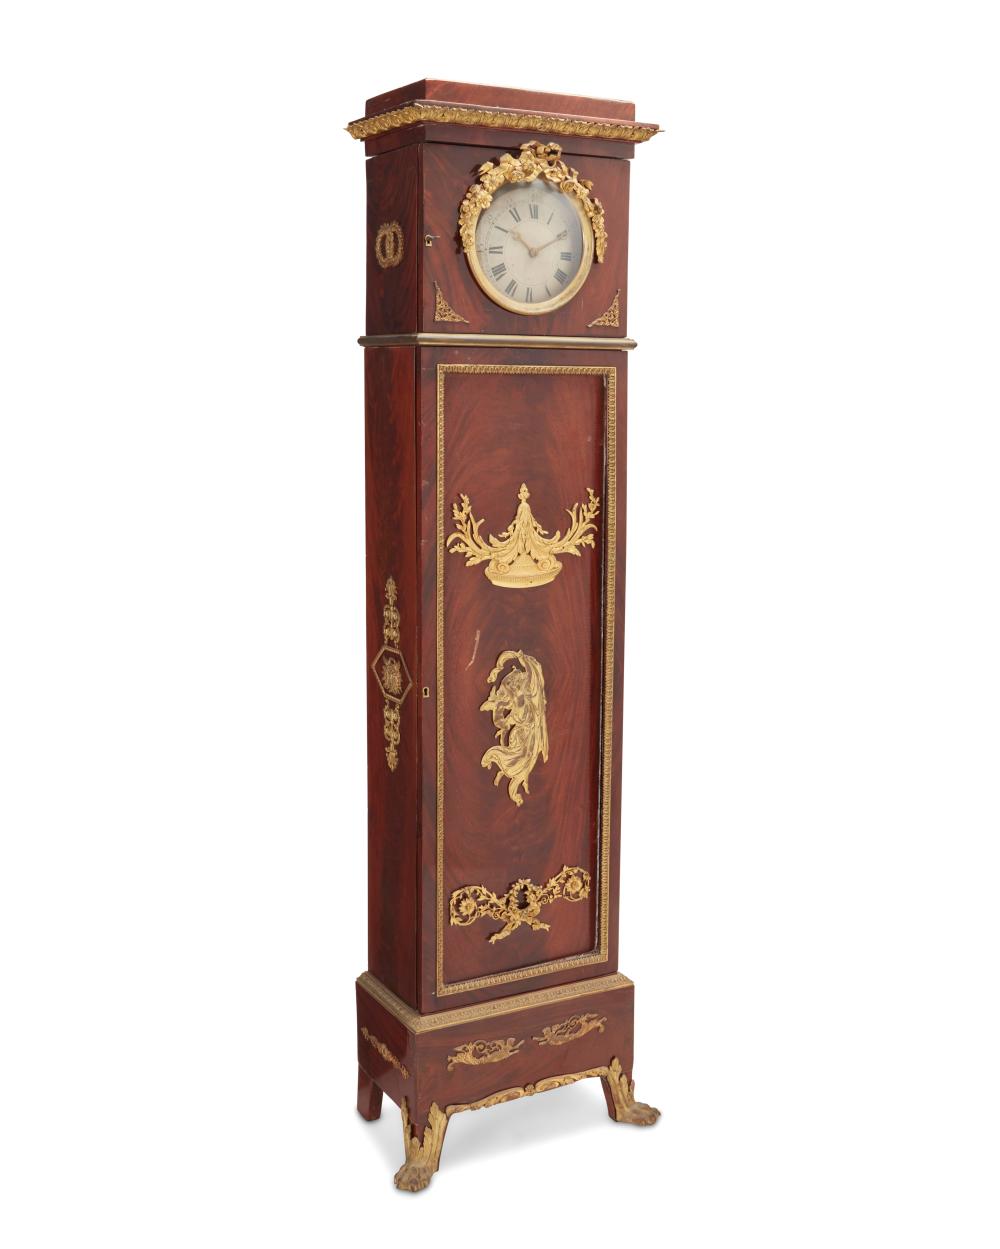 A FRENCH EMPIRE-STYLE TALL CASE